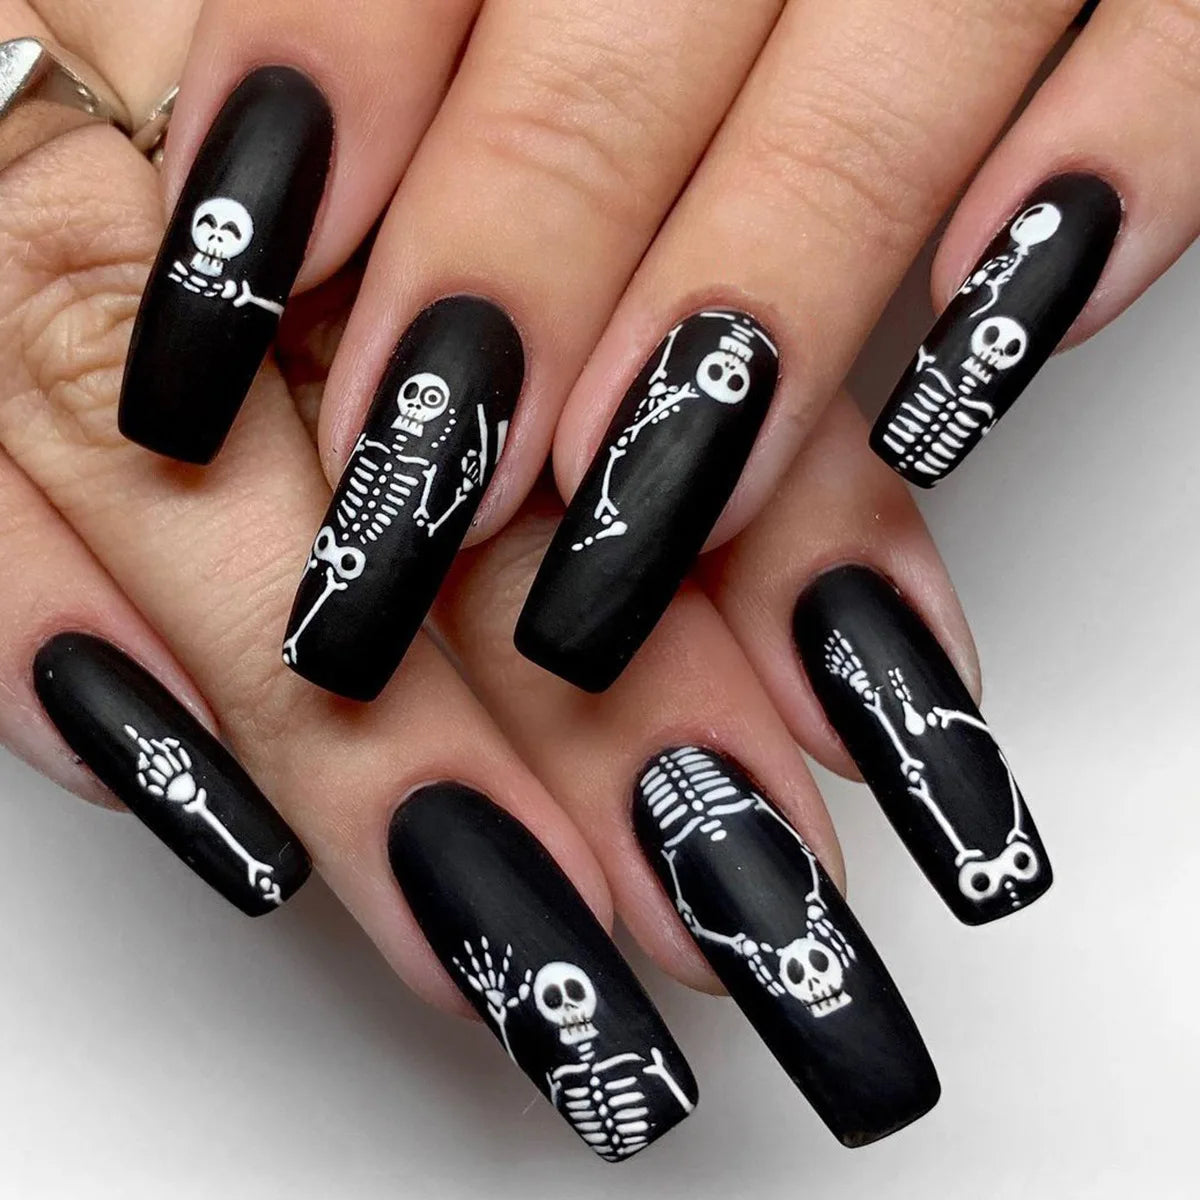 24Pcs Extra Long Matte Halloween Fake Nails Square Black Skeleton Press on Nails with Design Acrylic Artificial Nails Tips Art